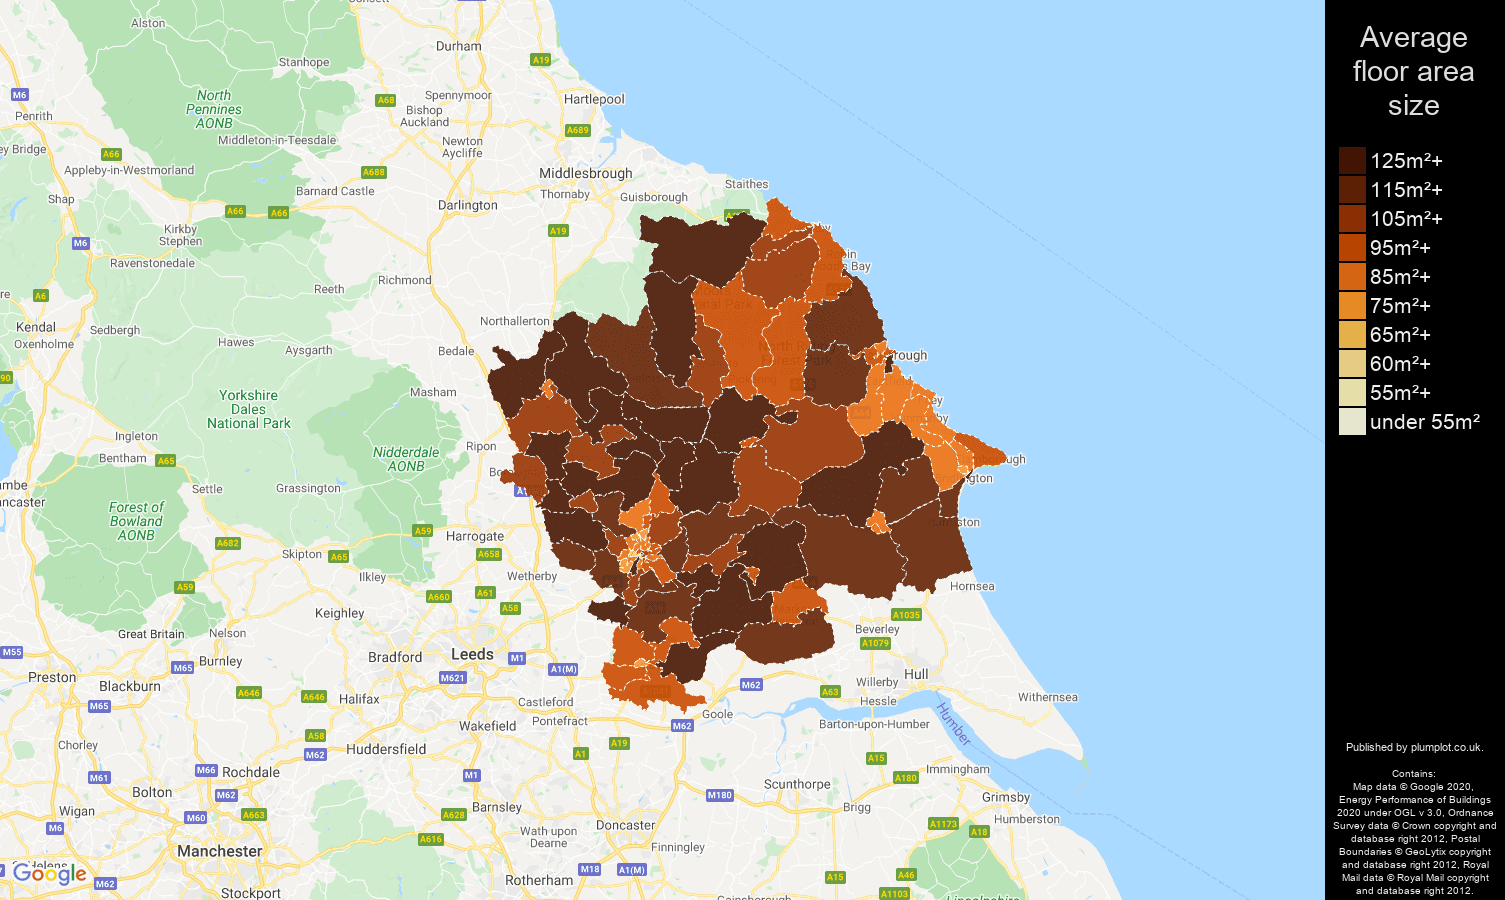 York map of average floor area size of houses